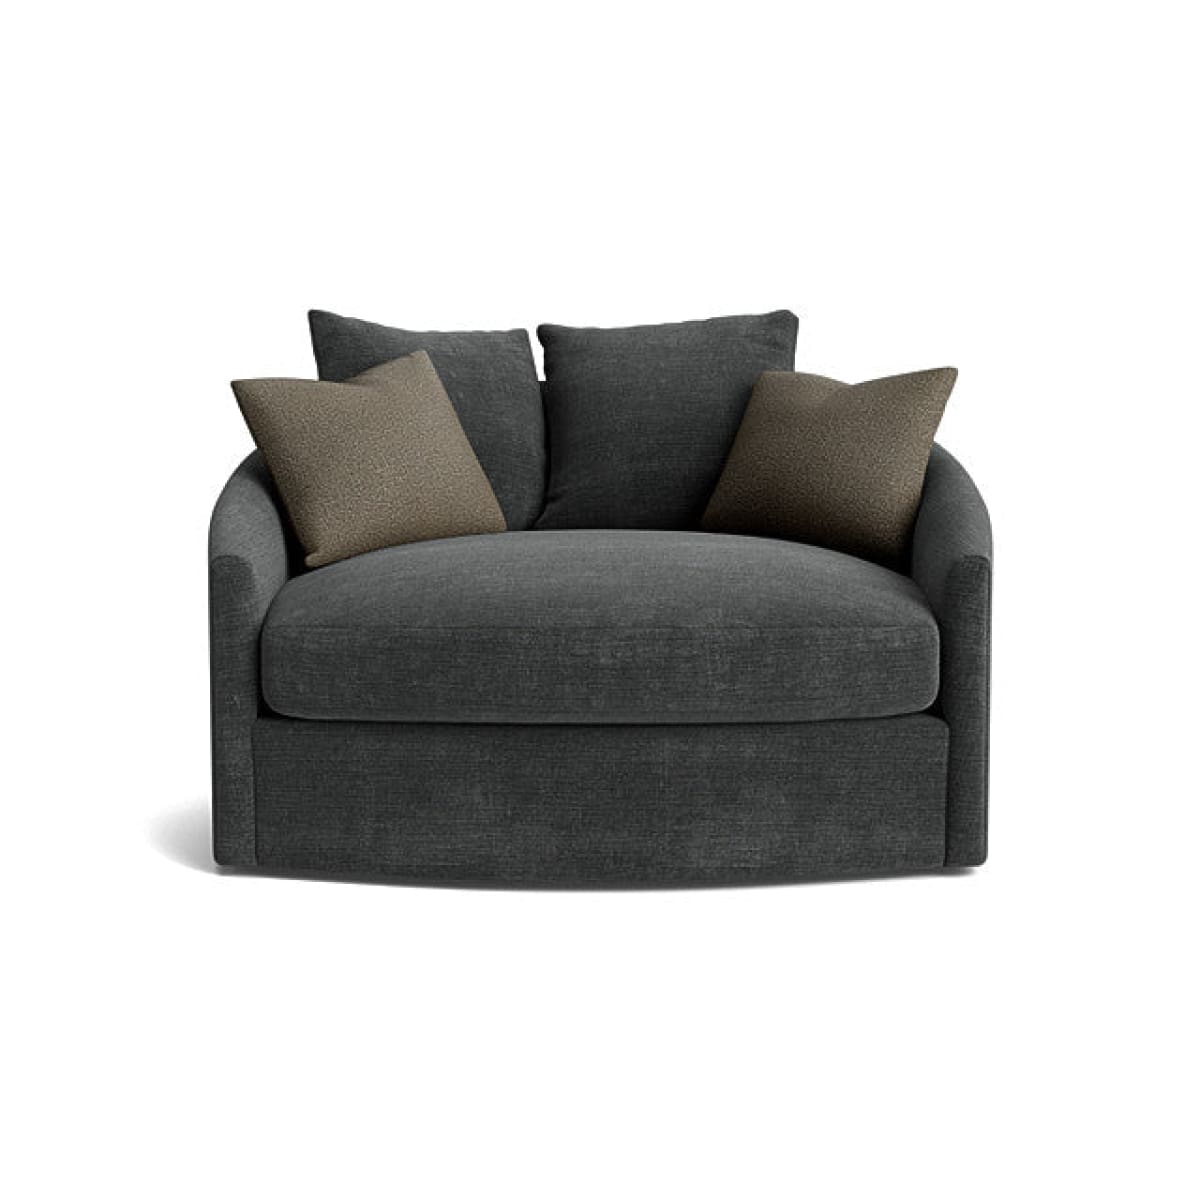 Escape Accent Chair - Analogy Charcoal